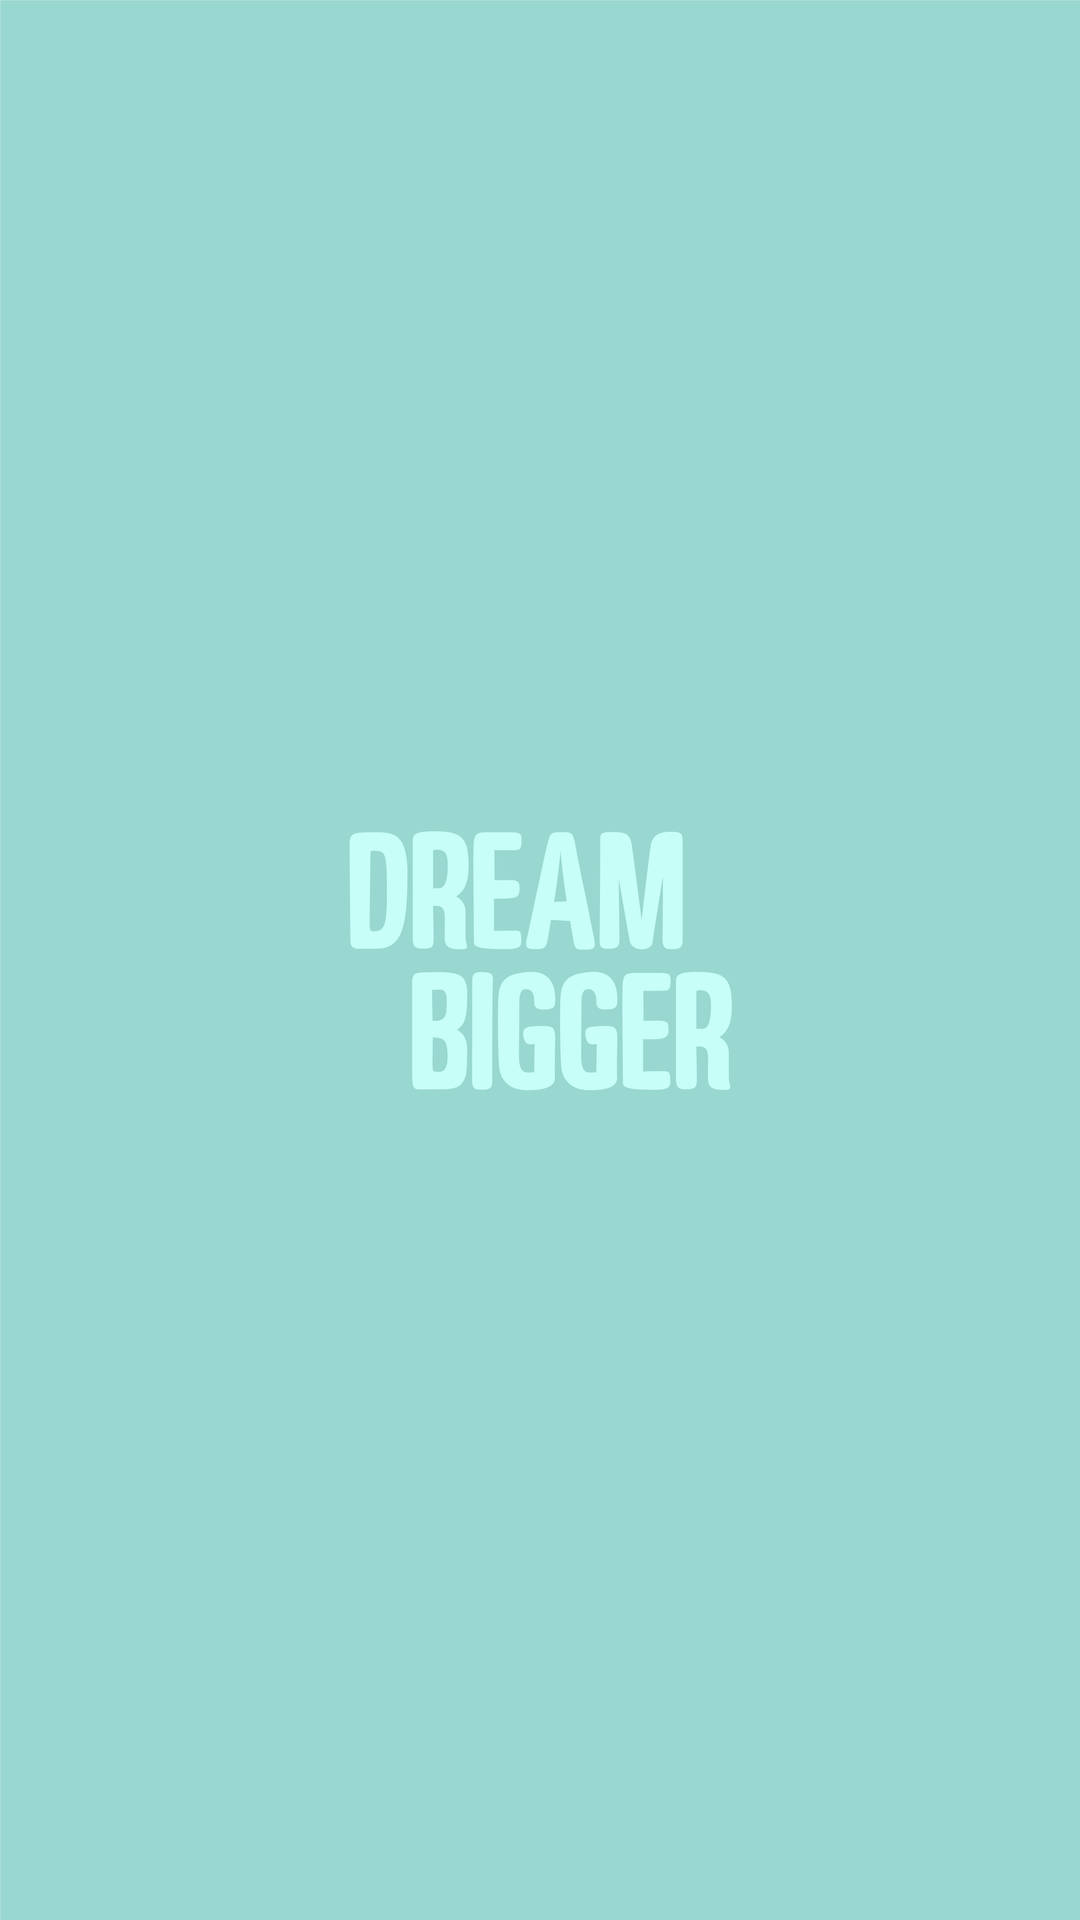 Ignite your inner spark with 'Big Dreams' - A Minimalist Motivational Design Wallpaper